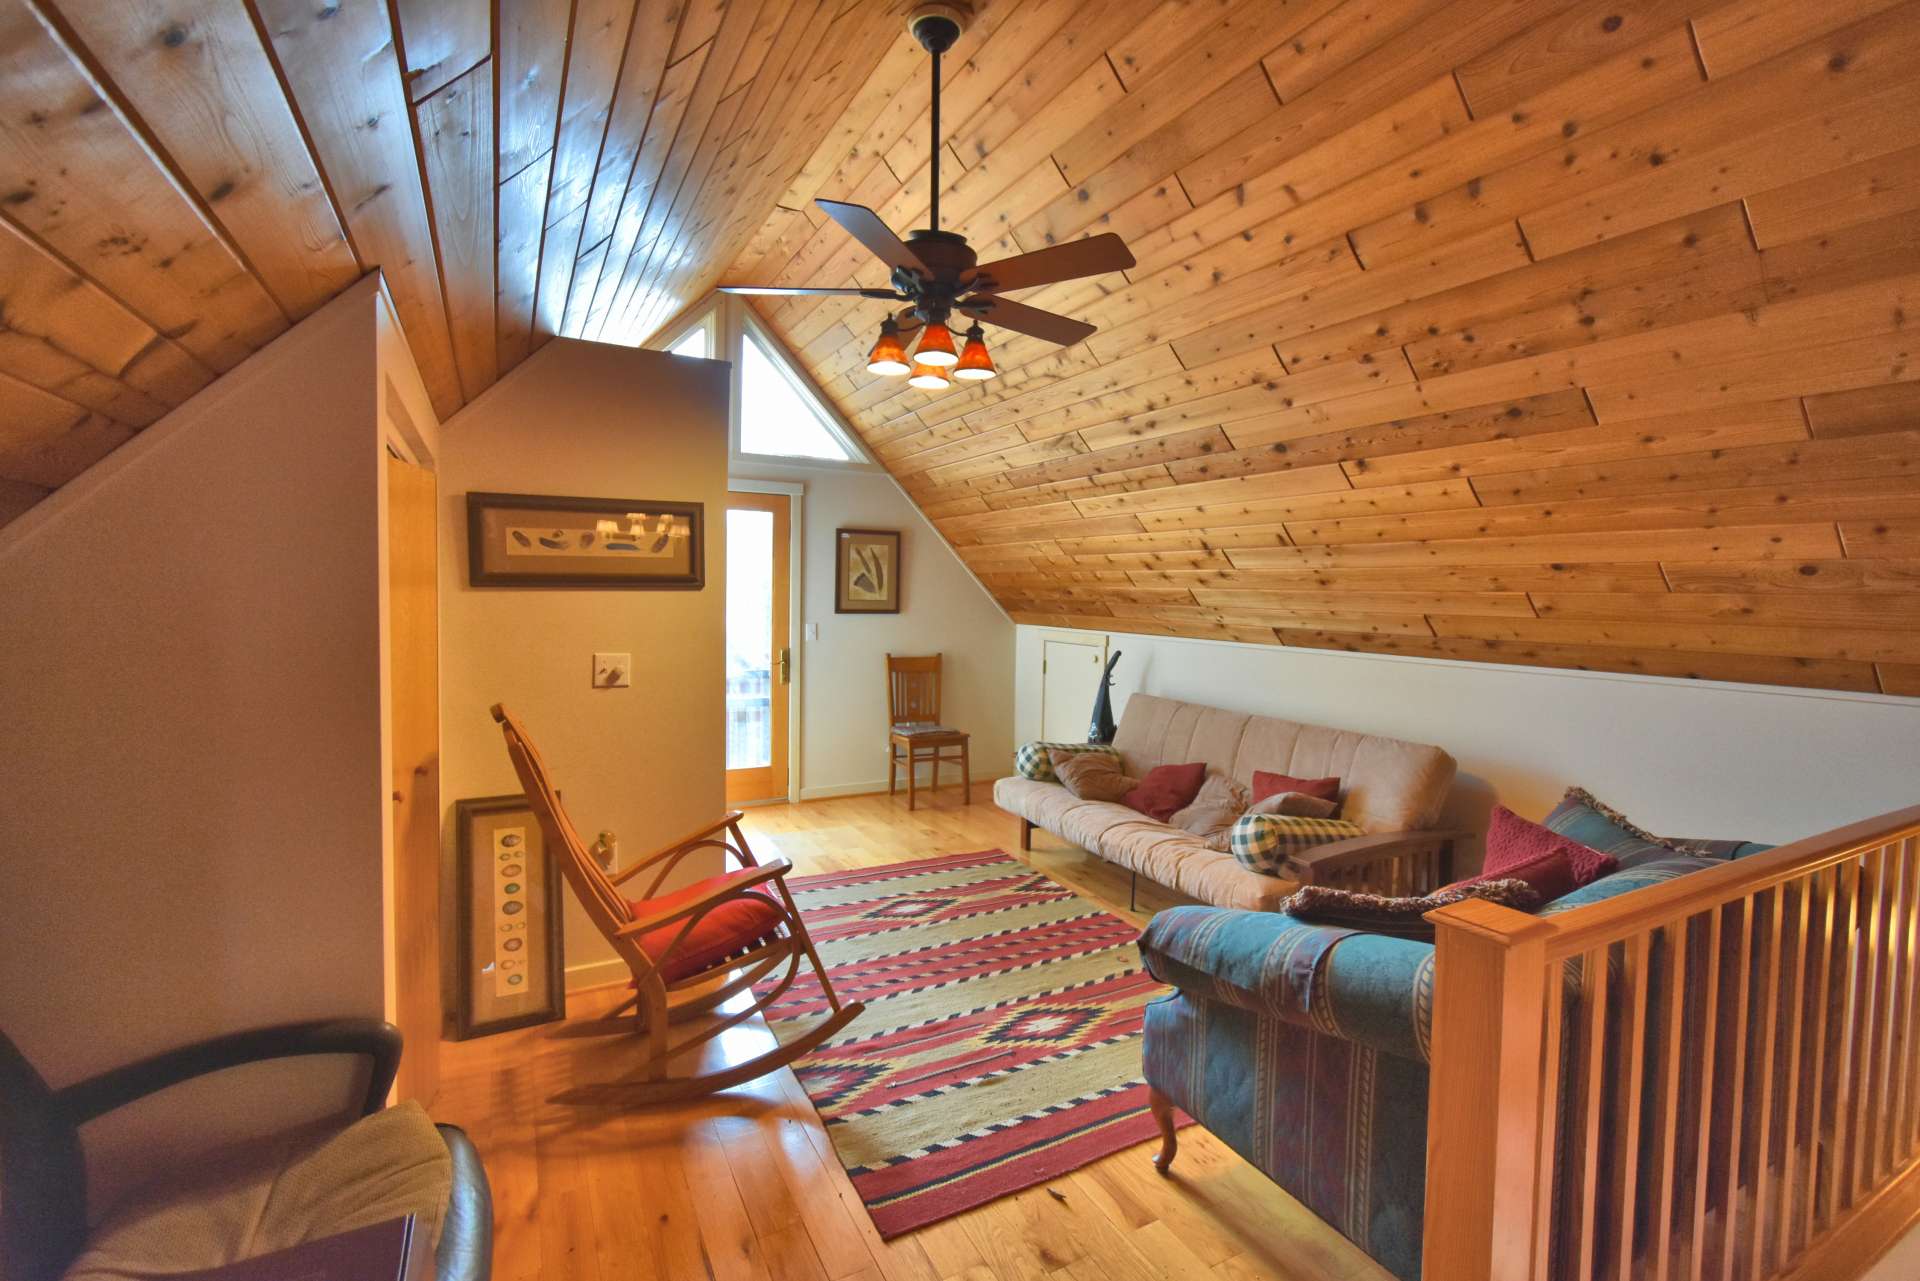 The large sleeping loft features access to a private balcony and a full bath.